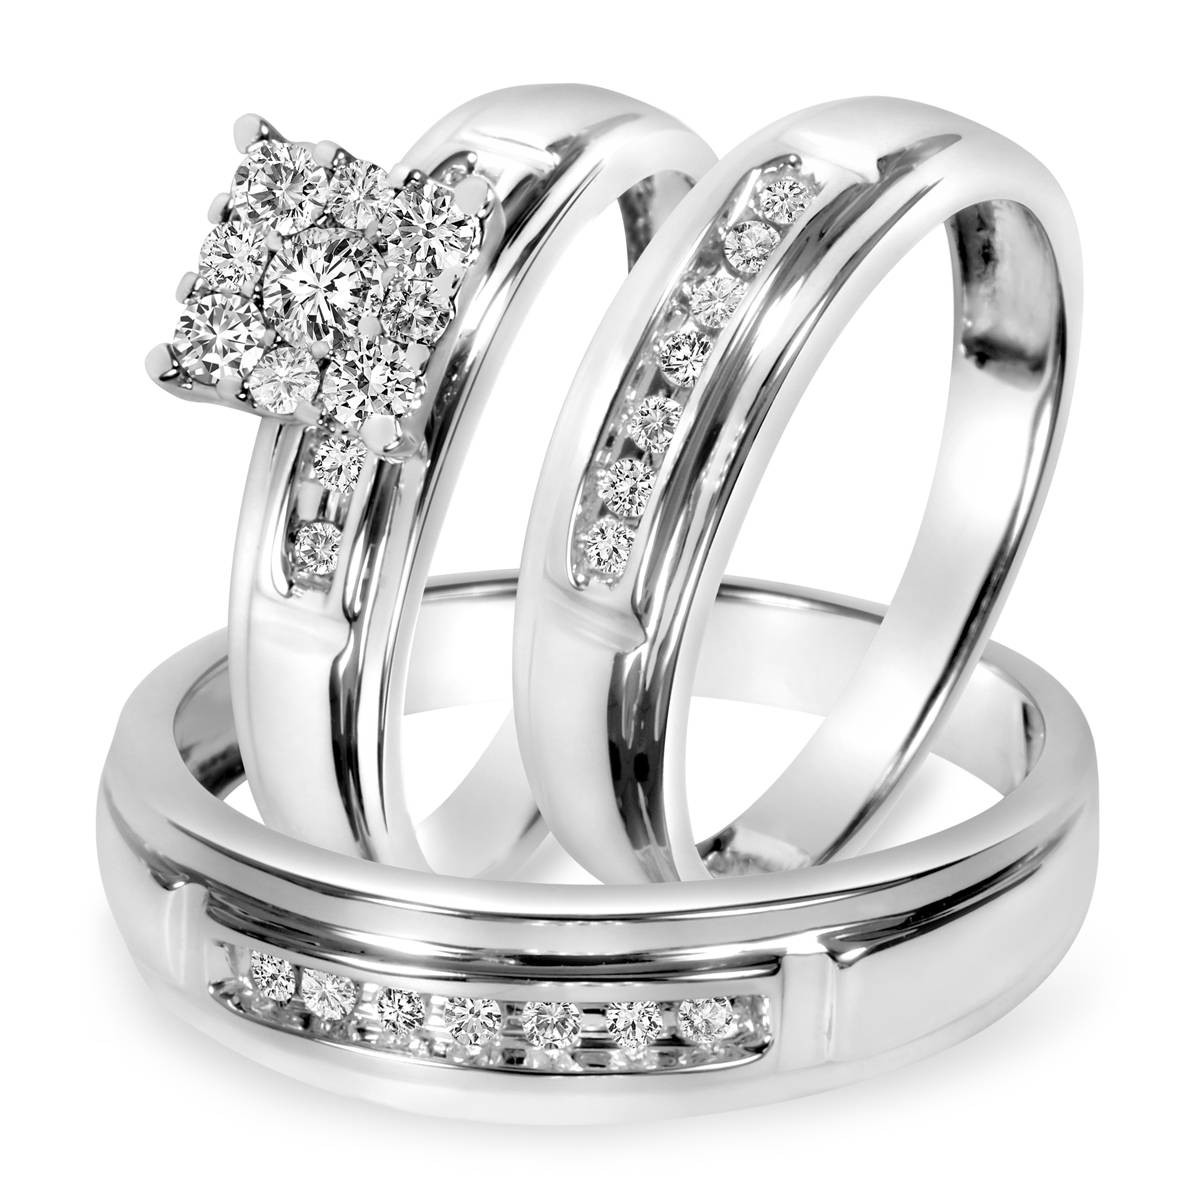 White Gold Wedding Bands Sets
 15 Inspirations of Cheap Wedding Bands Sets His And Hers